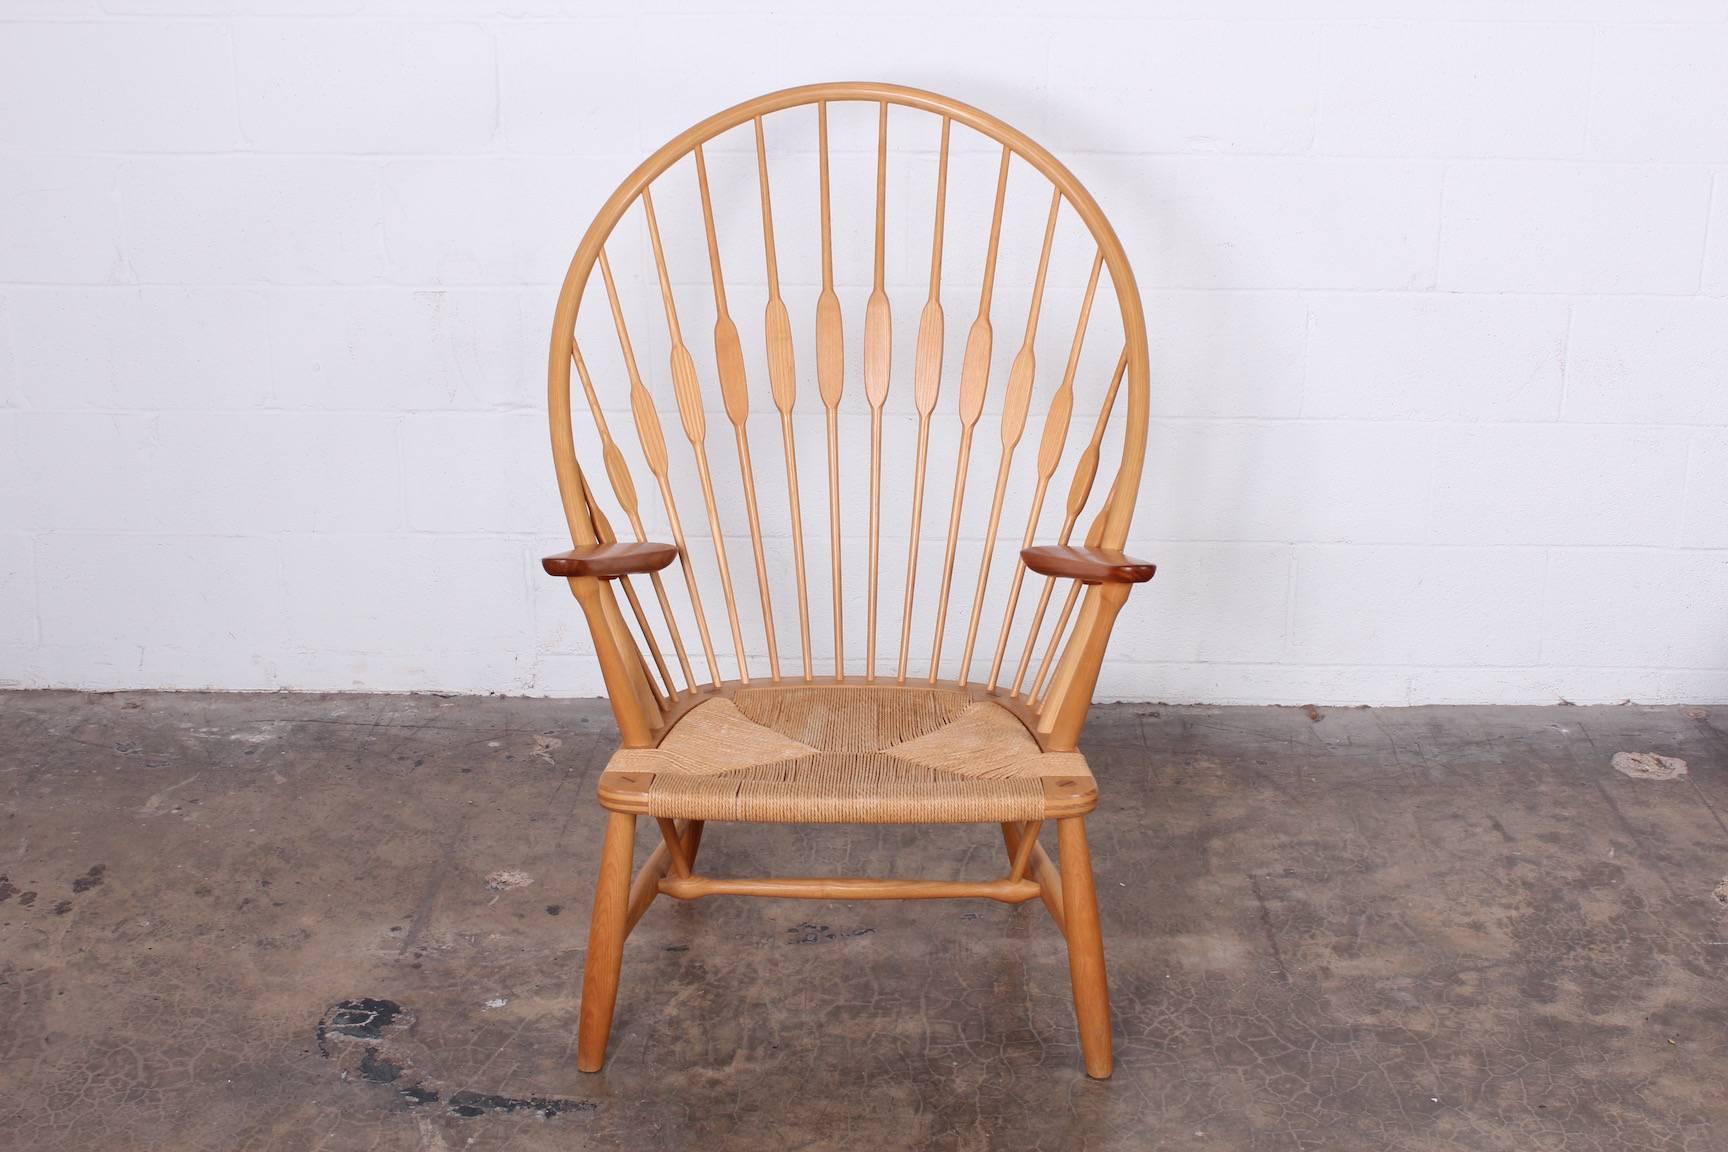 The 'Peacock' chair was designed by Hans Wegner in 1947 and manufactured by Johannes Hansen, Denmark. It features a solid ash frame with a rounded high back, contrasting teak arms, and a woven paper cord seat.